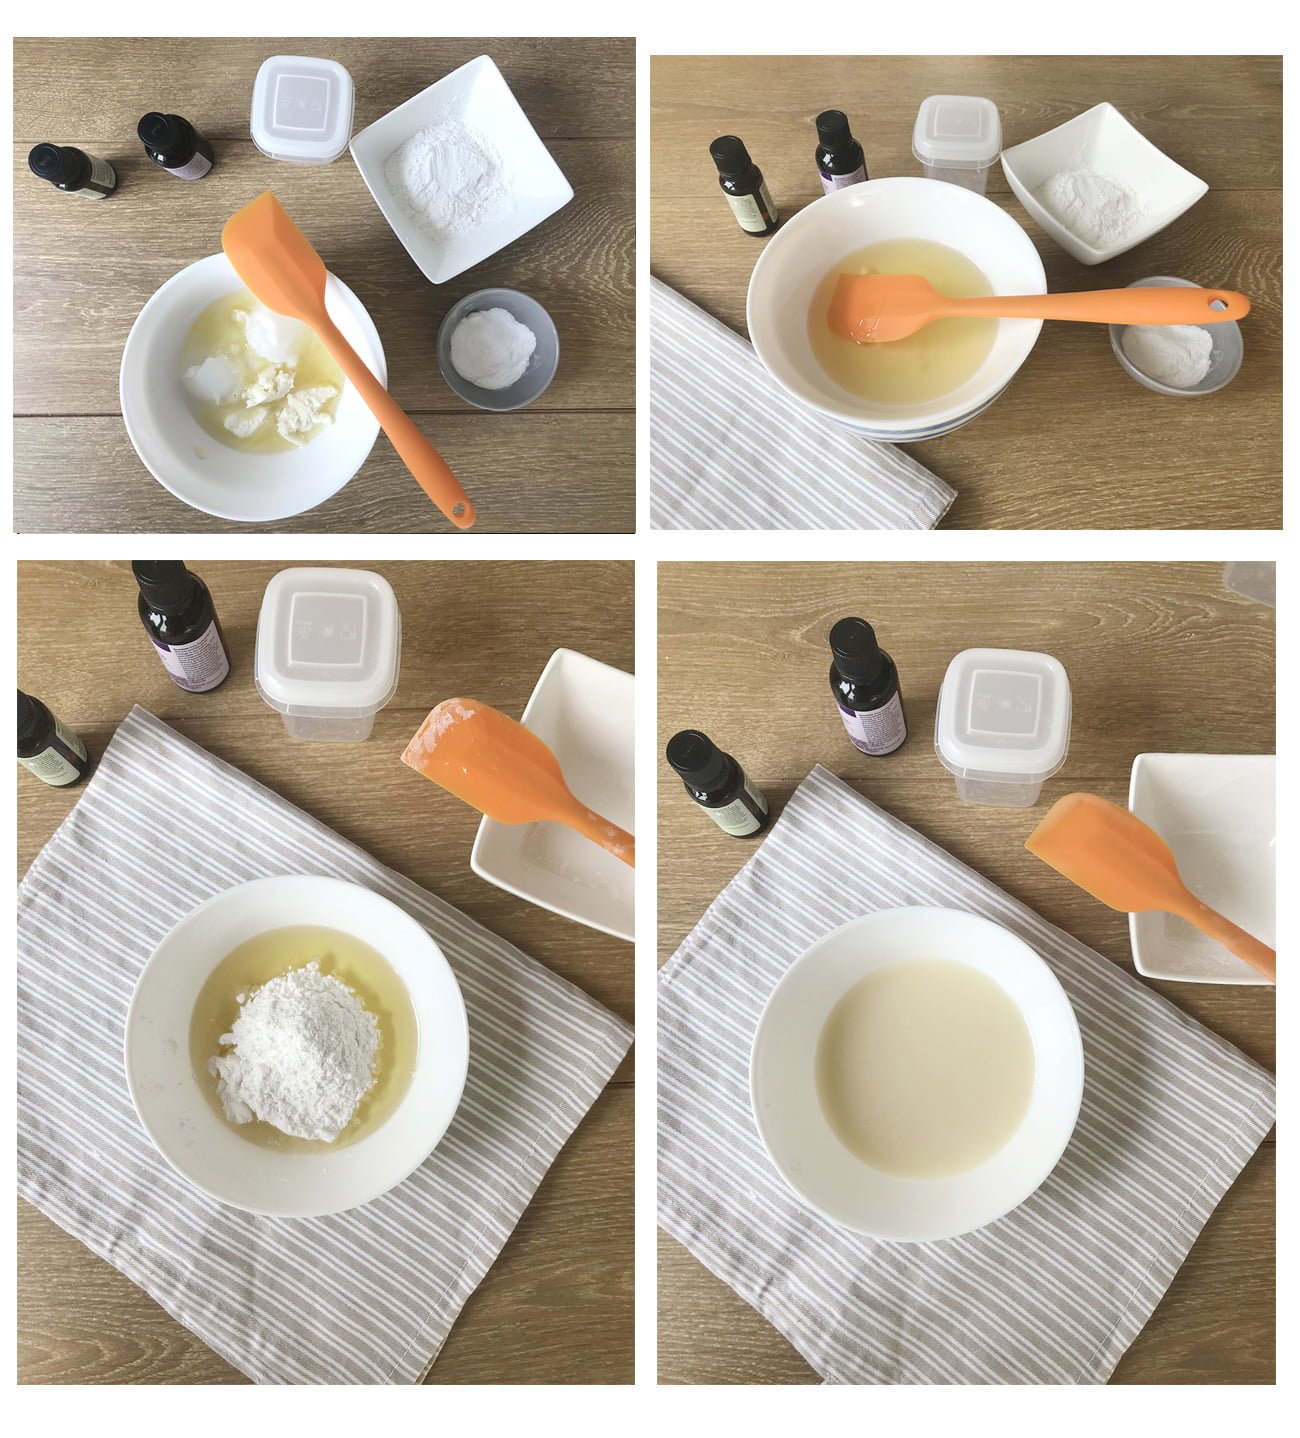 steps of making the natural homemade deodorant